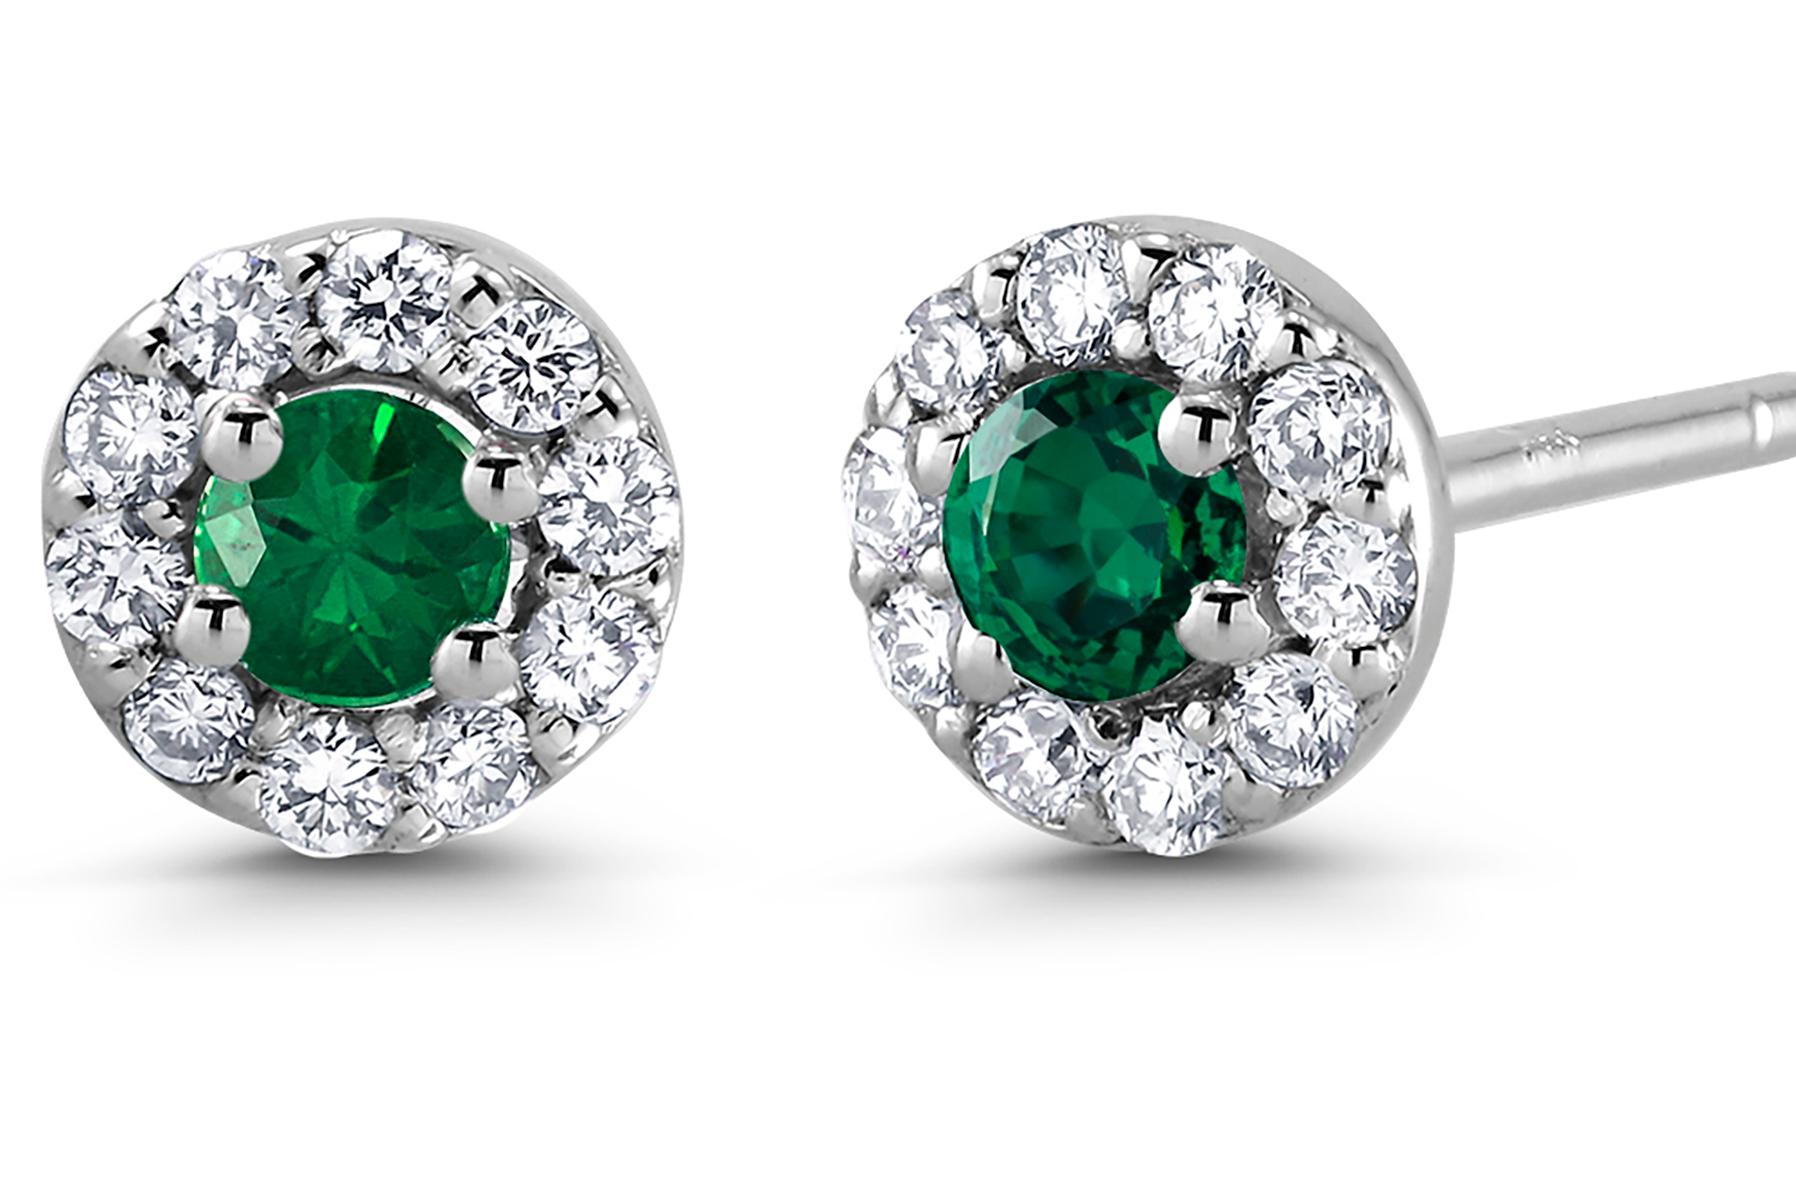 14 karat white gold halo emerald and diamond earrings 
Emerald weight 0.20 
Diamond weighing 0.27 carat
New Earrings
Width 0.25 inch
Emerald hue tone color deep forest green 
The halo setting is a setting that encircles any shaped gemstone with tiny